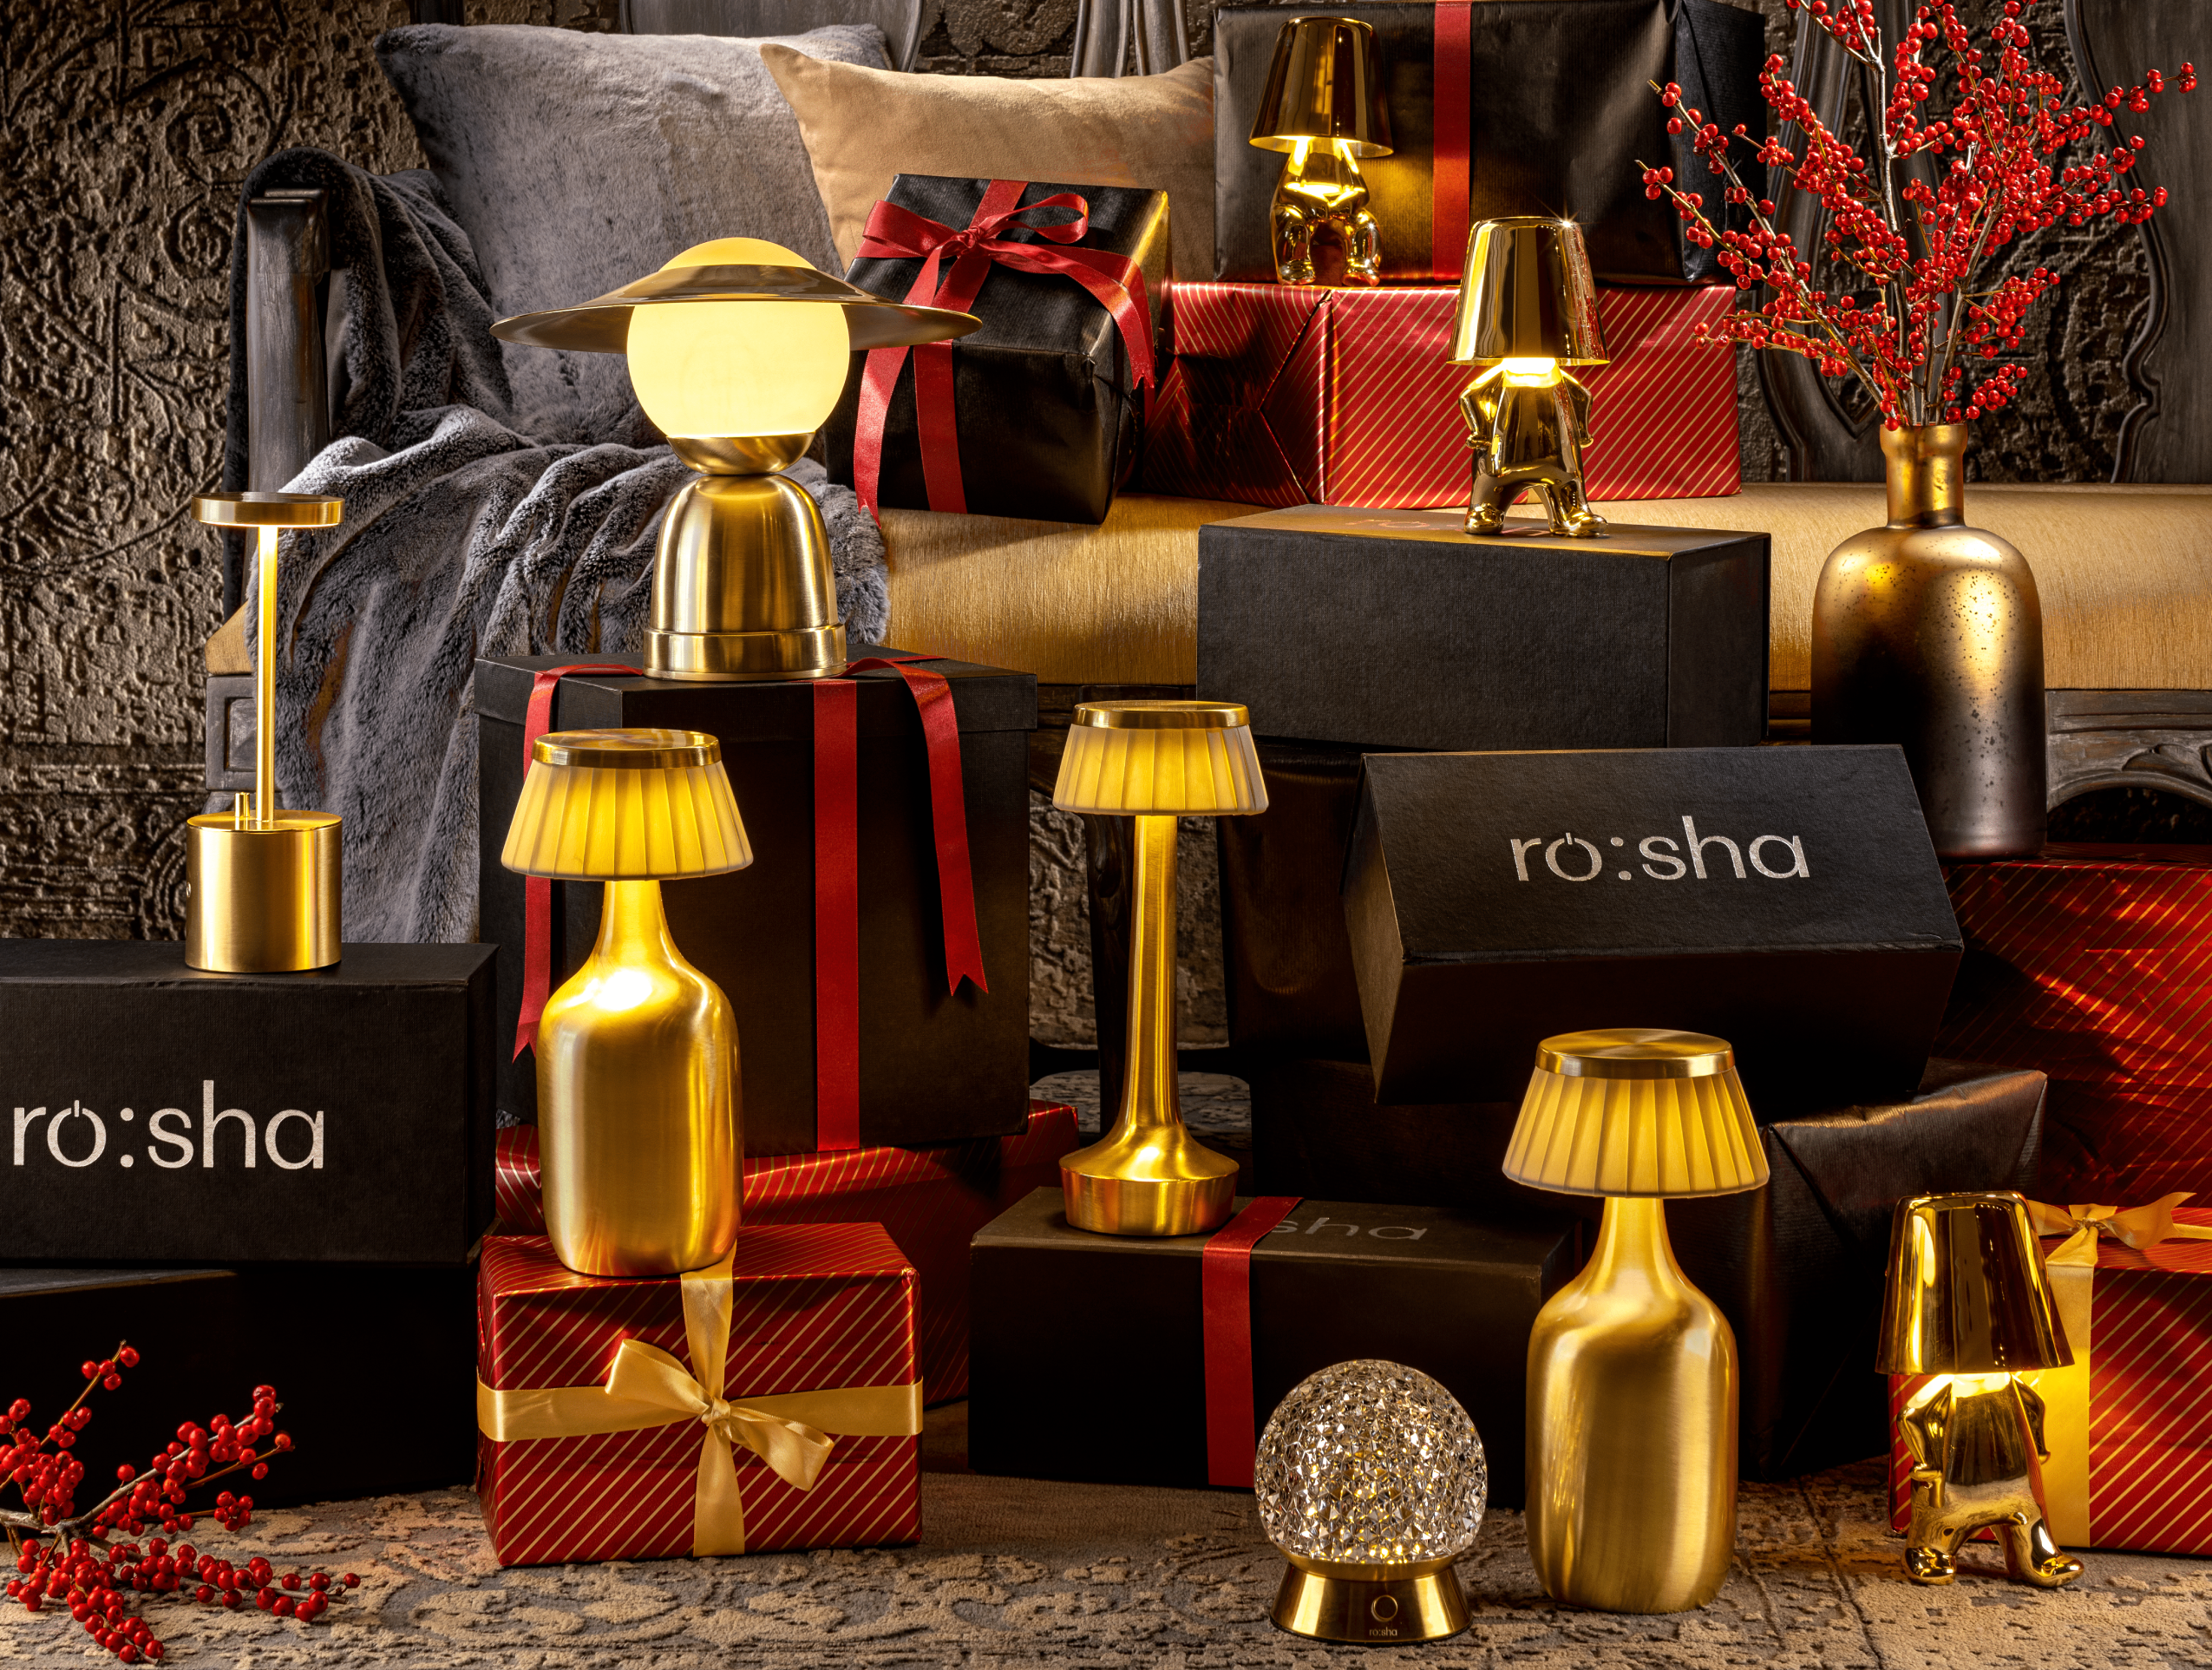 Why Rosha lamps are best for gifting